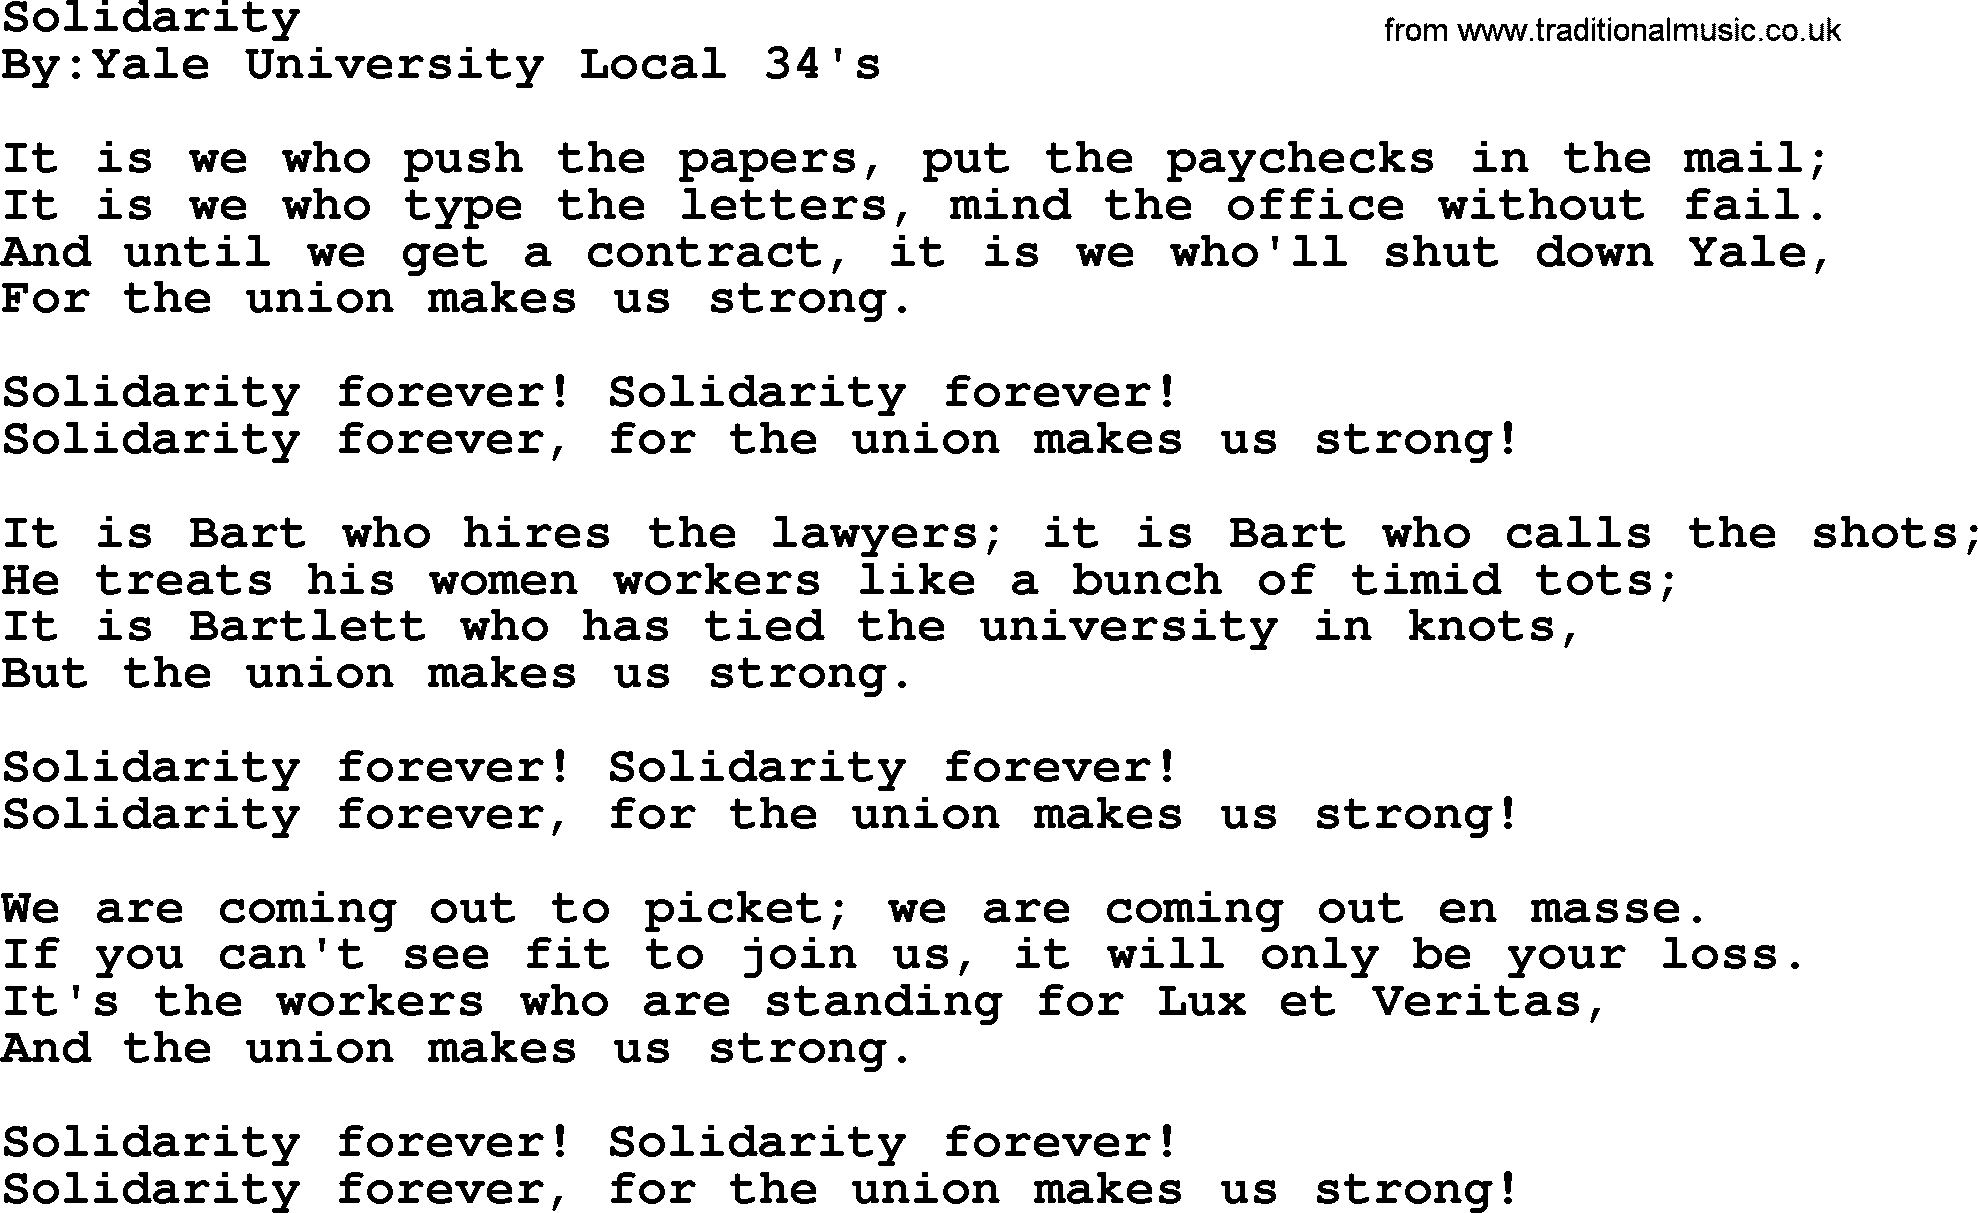 Political, Solidarity, Workers or Union song: Solidarity, lyrics